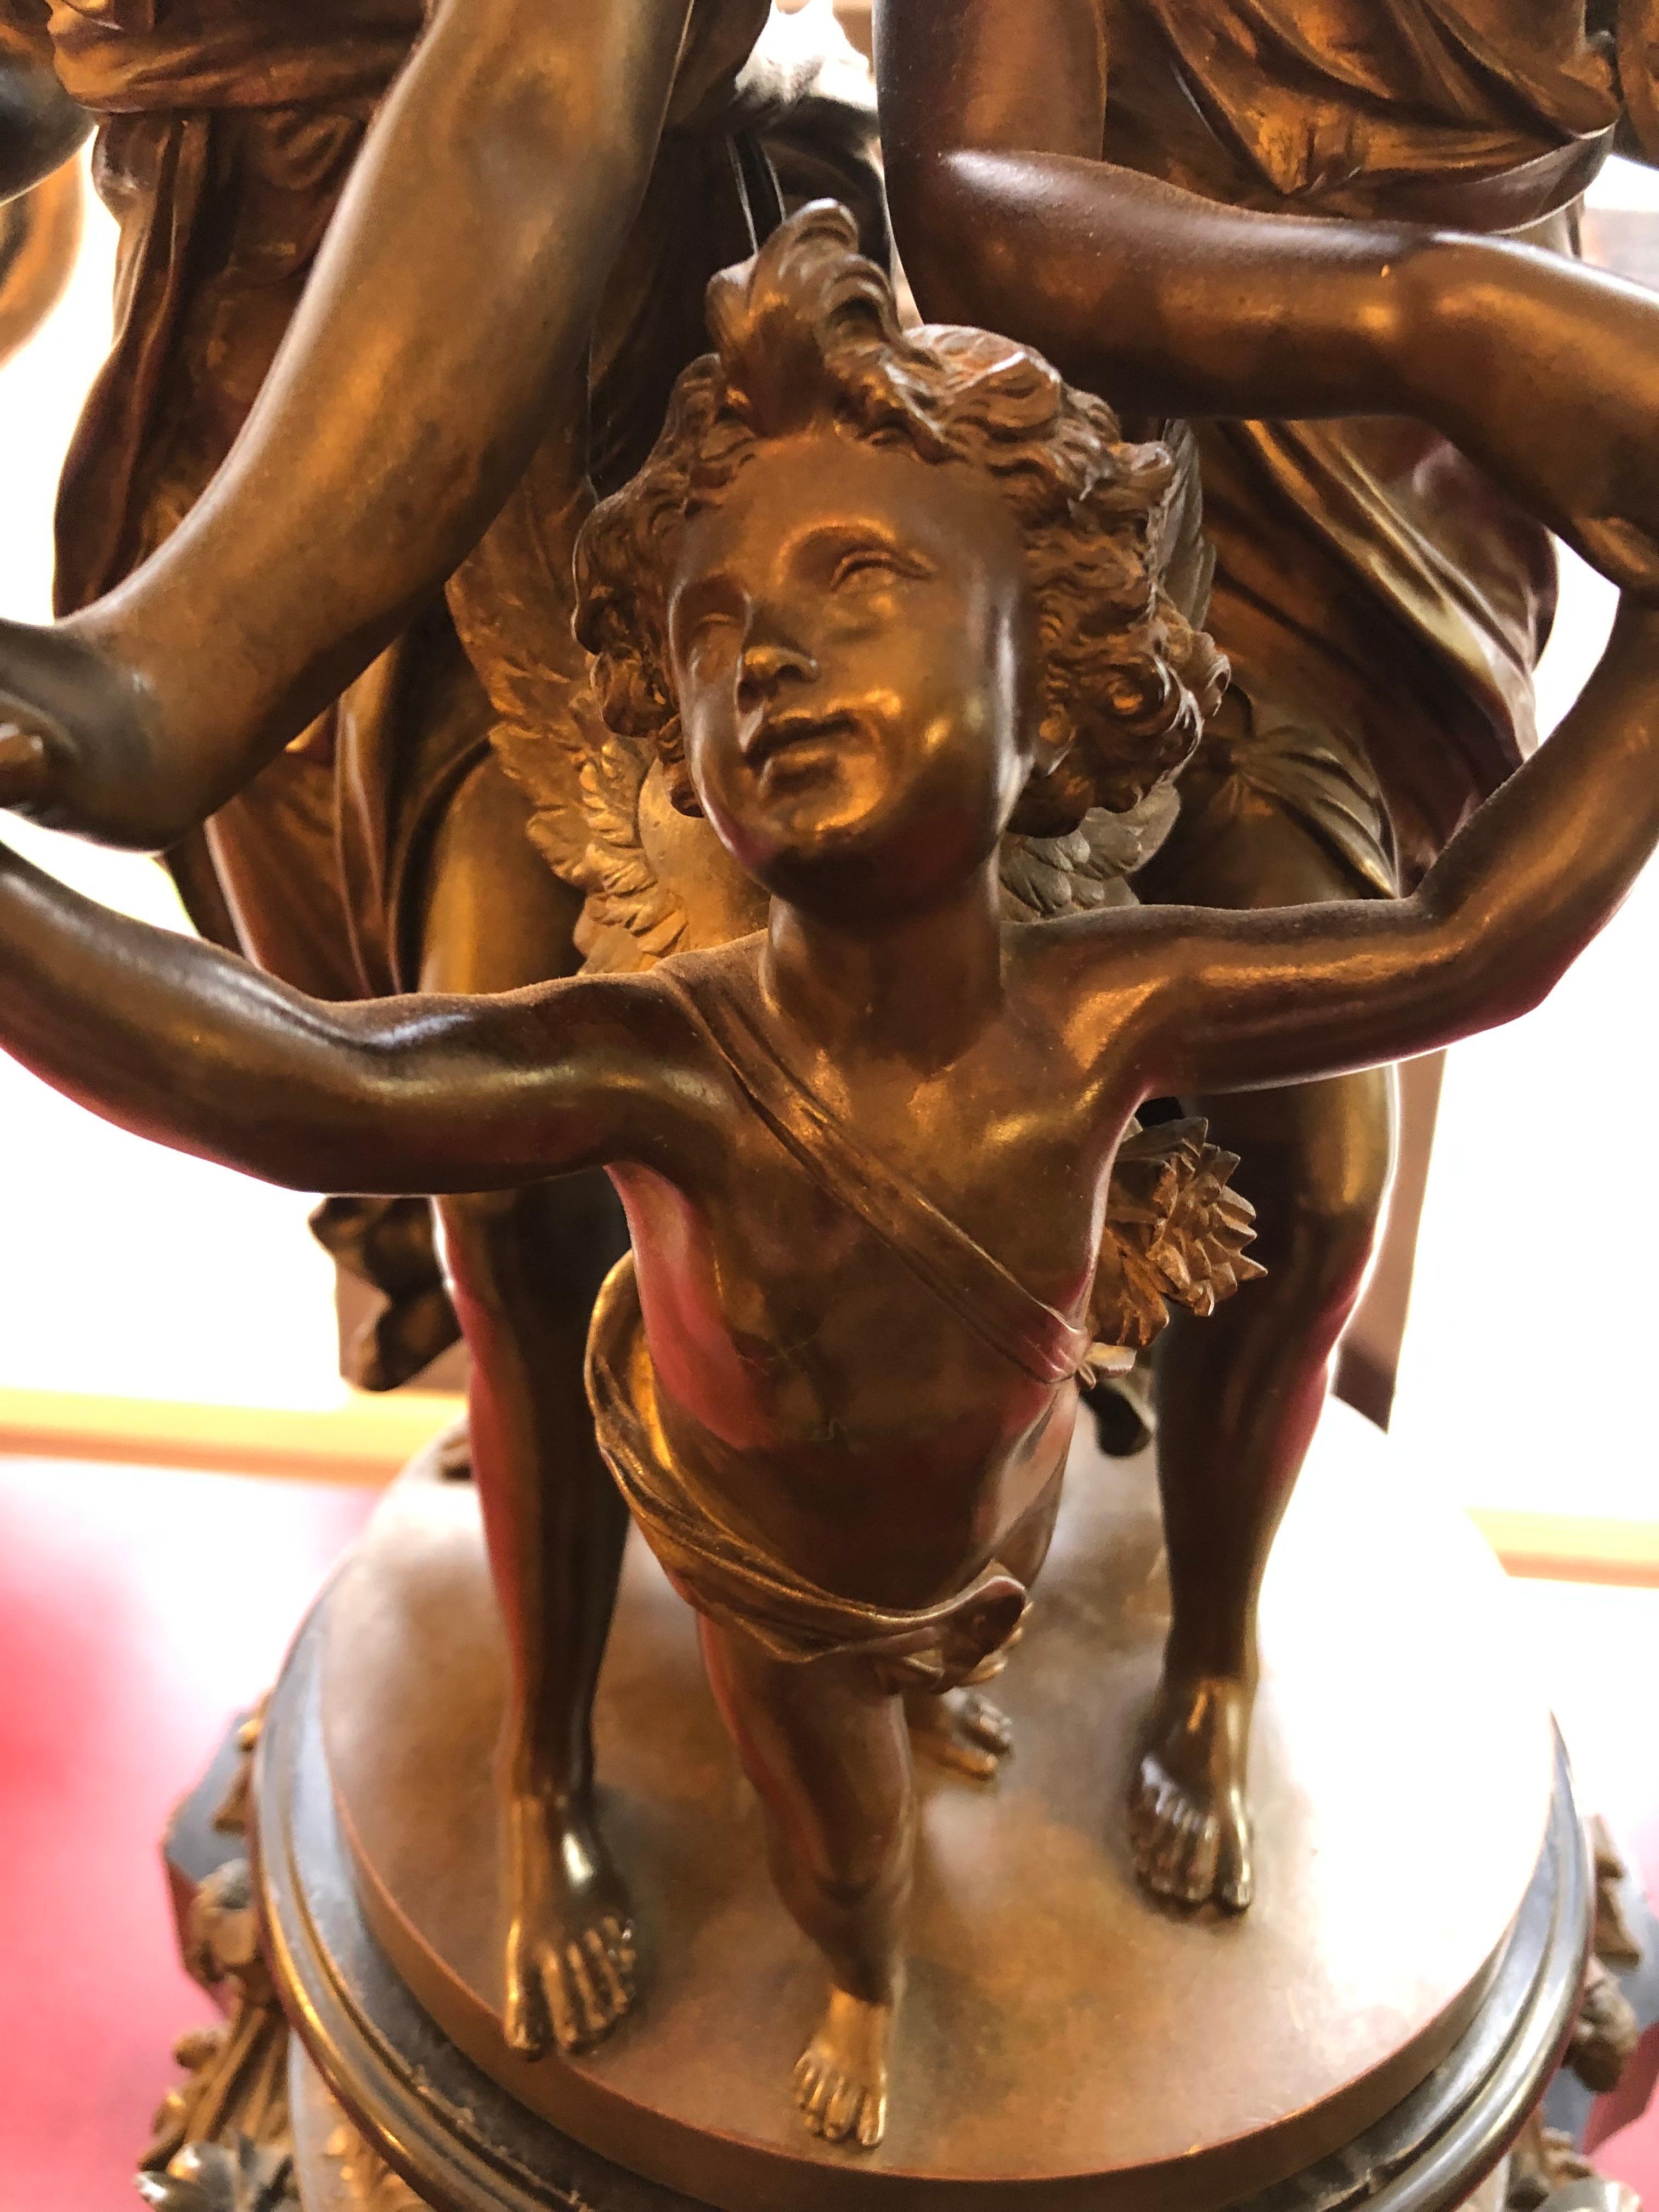 Black marble mantel clock with Dore bronze highlights surmounted by a patinated bronze statue of two partially clad female figures, one holding a tambourine. Both females hold the hand of a cherub, possibly Cupid. All stand on a circular gilt metal